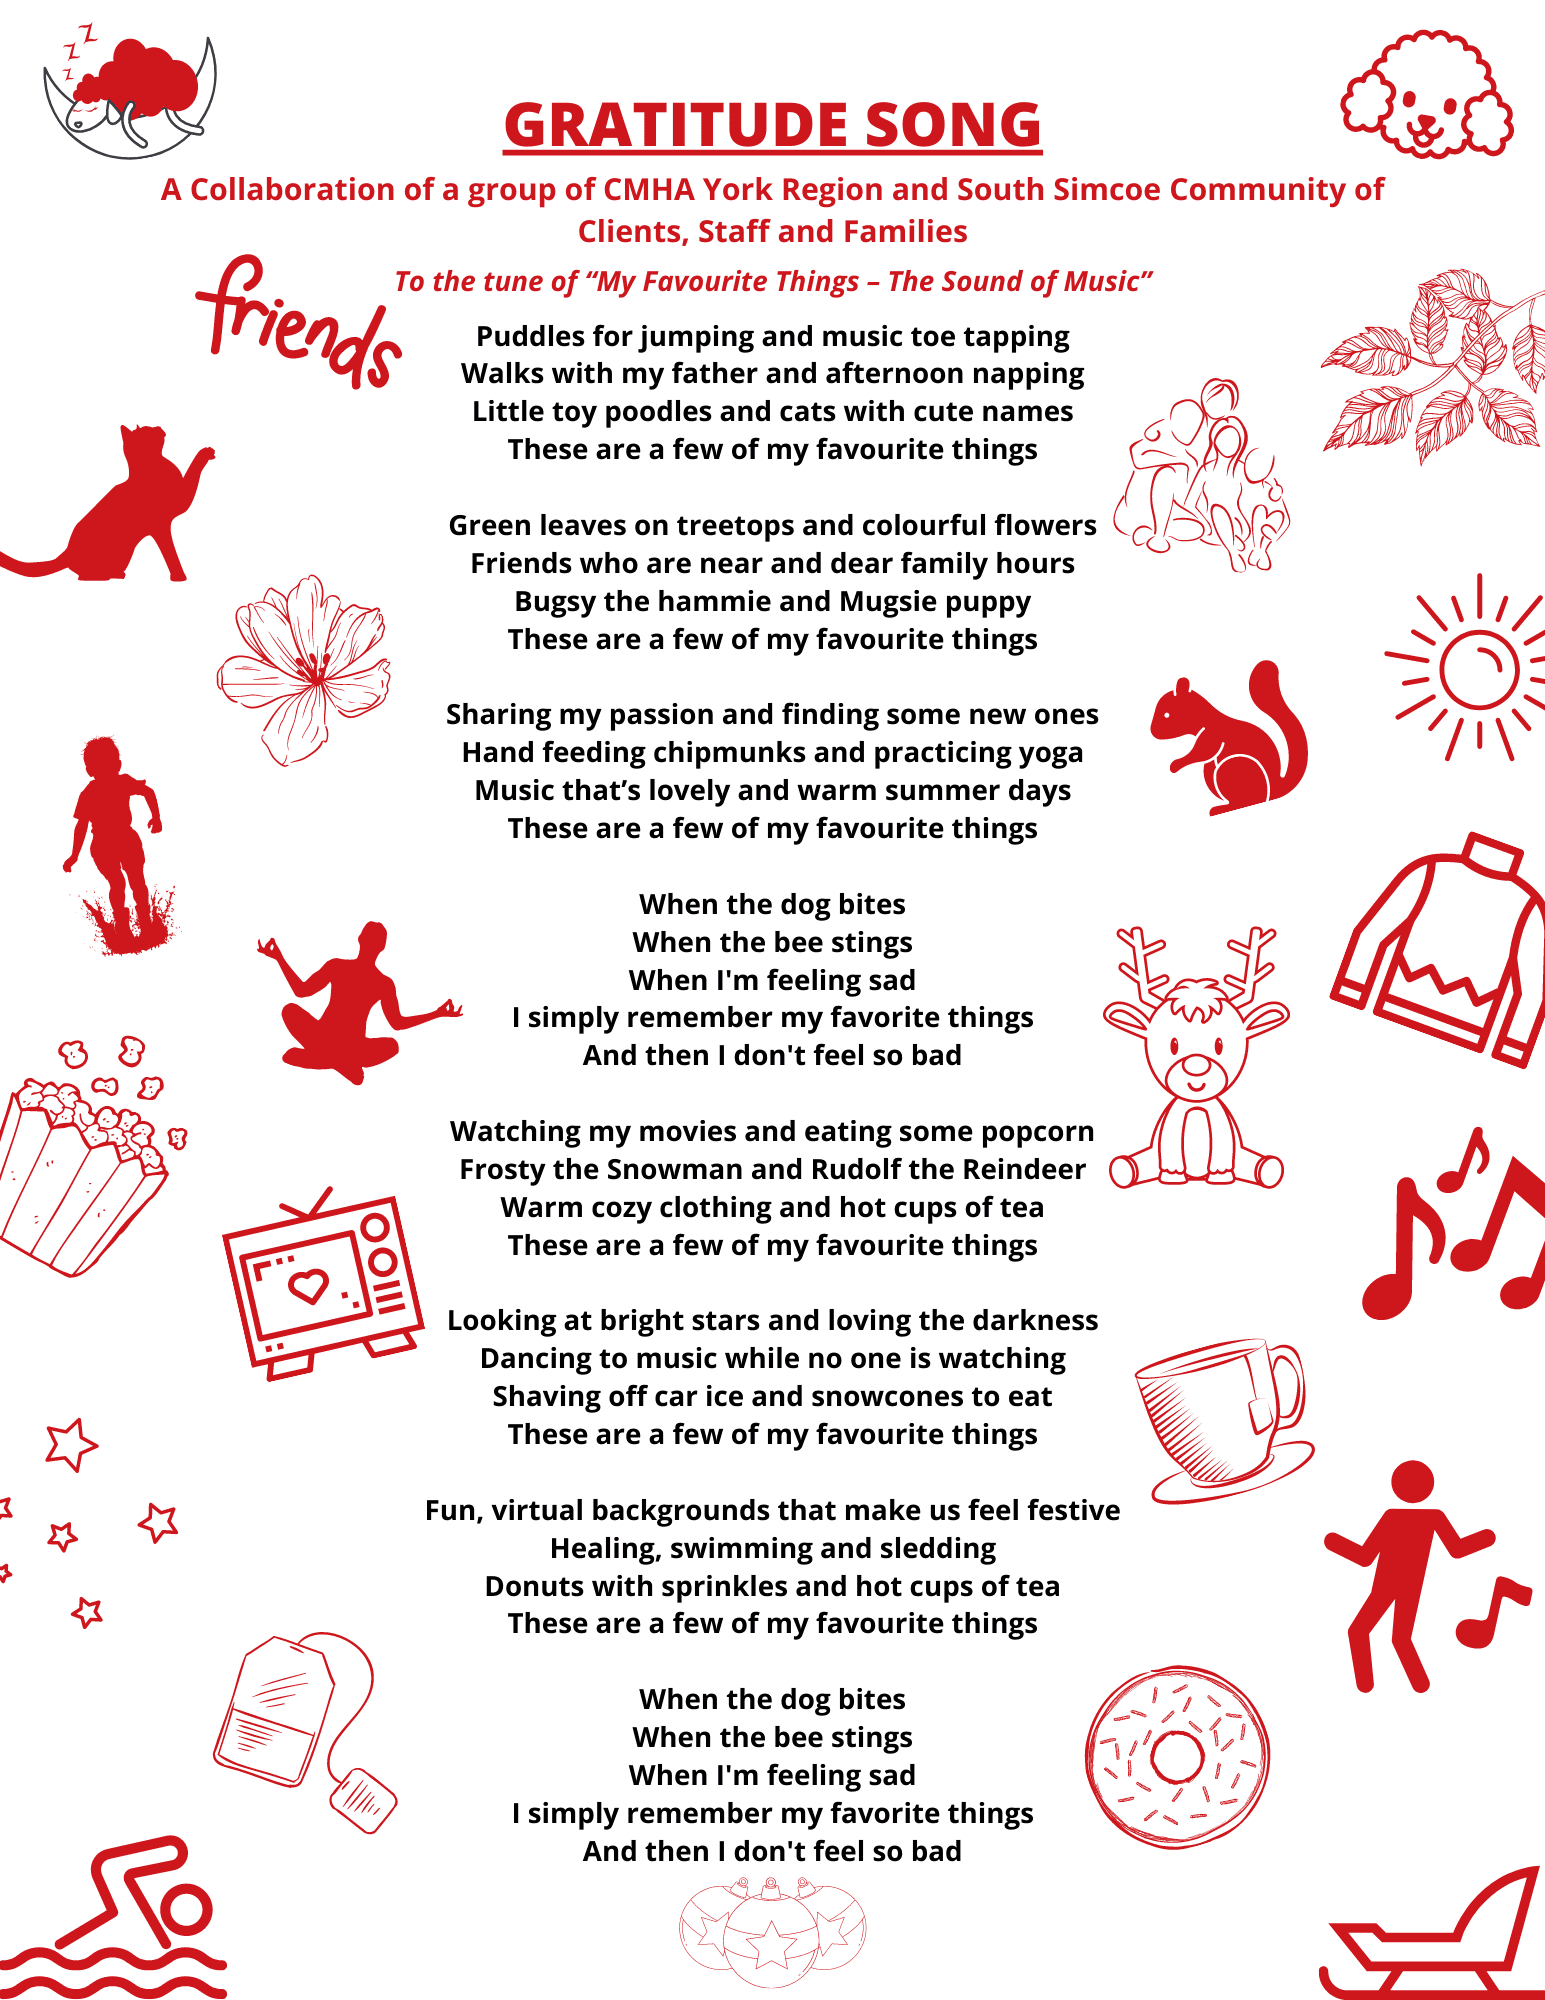 Lyrics for CMHA Gratitude song "My favourite things - the sound of music"